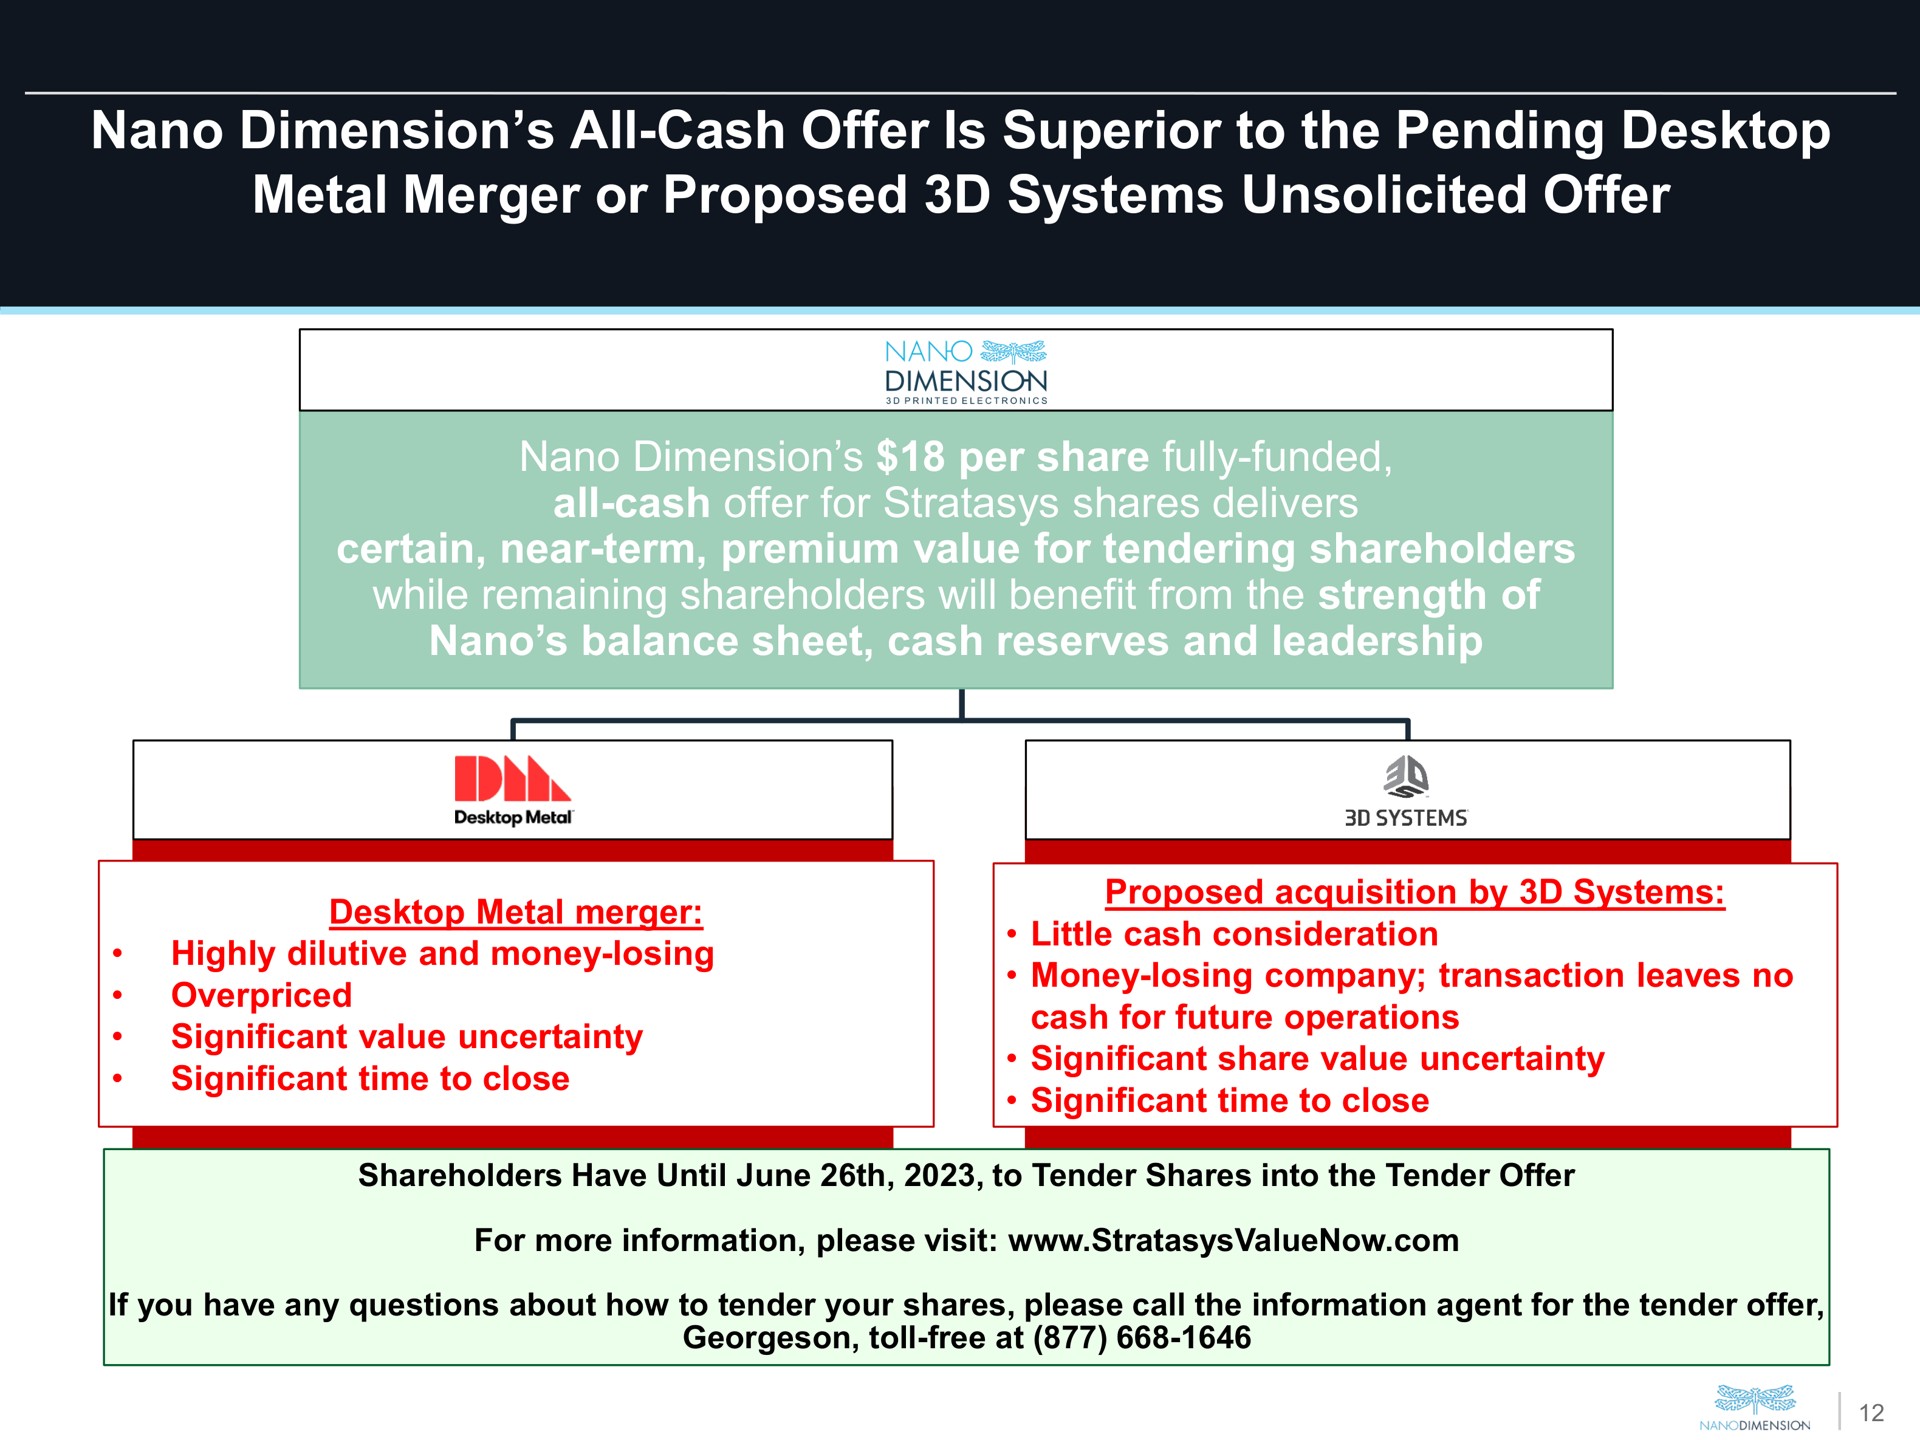 dimension all cash offer is superior to the pending metal merger or proposed systems unsolicited offer dimension per share fully funded all cash offer for shares delivers certain near term premium value for tendering shareholders while remaining shareholders will benefit from the strength of balance sheet cash reserves and leadership | Nano Dimension